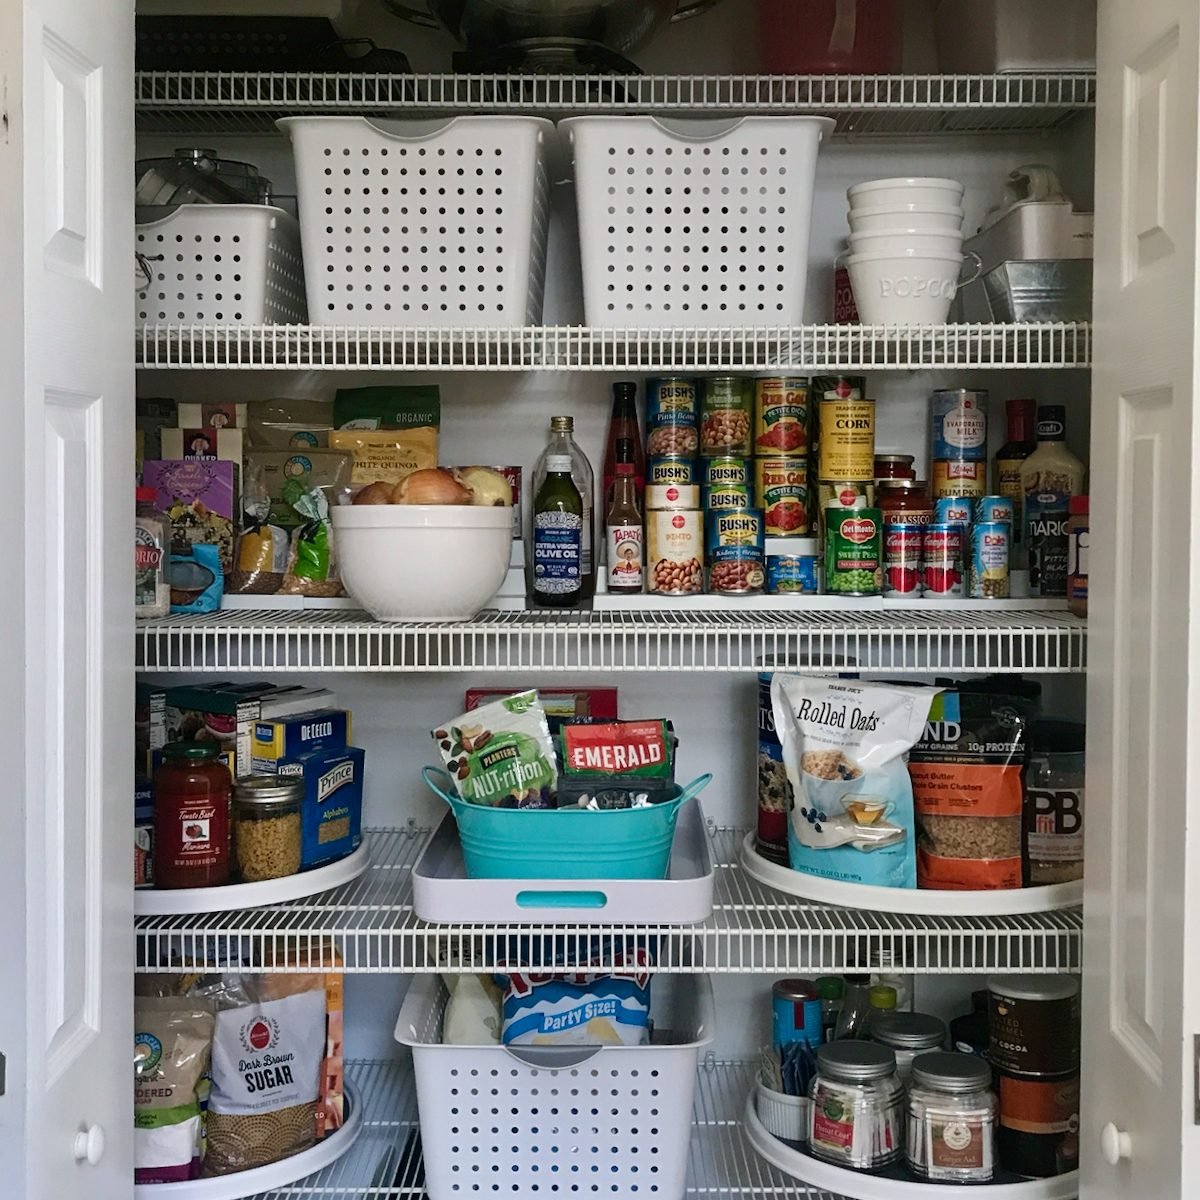 How to Organize Your Pantry (DIY)